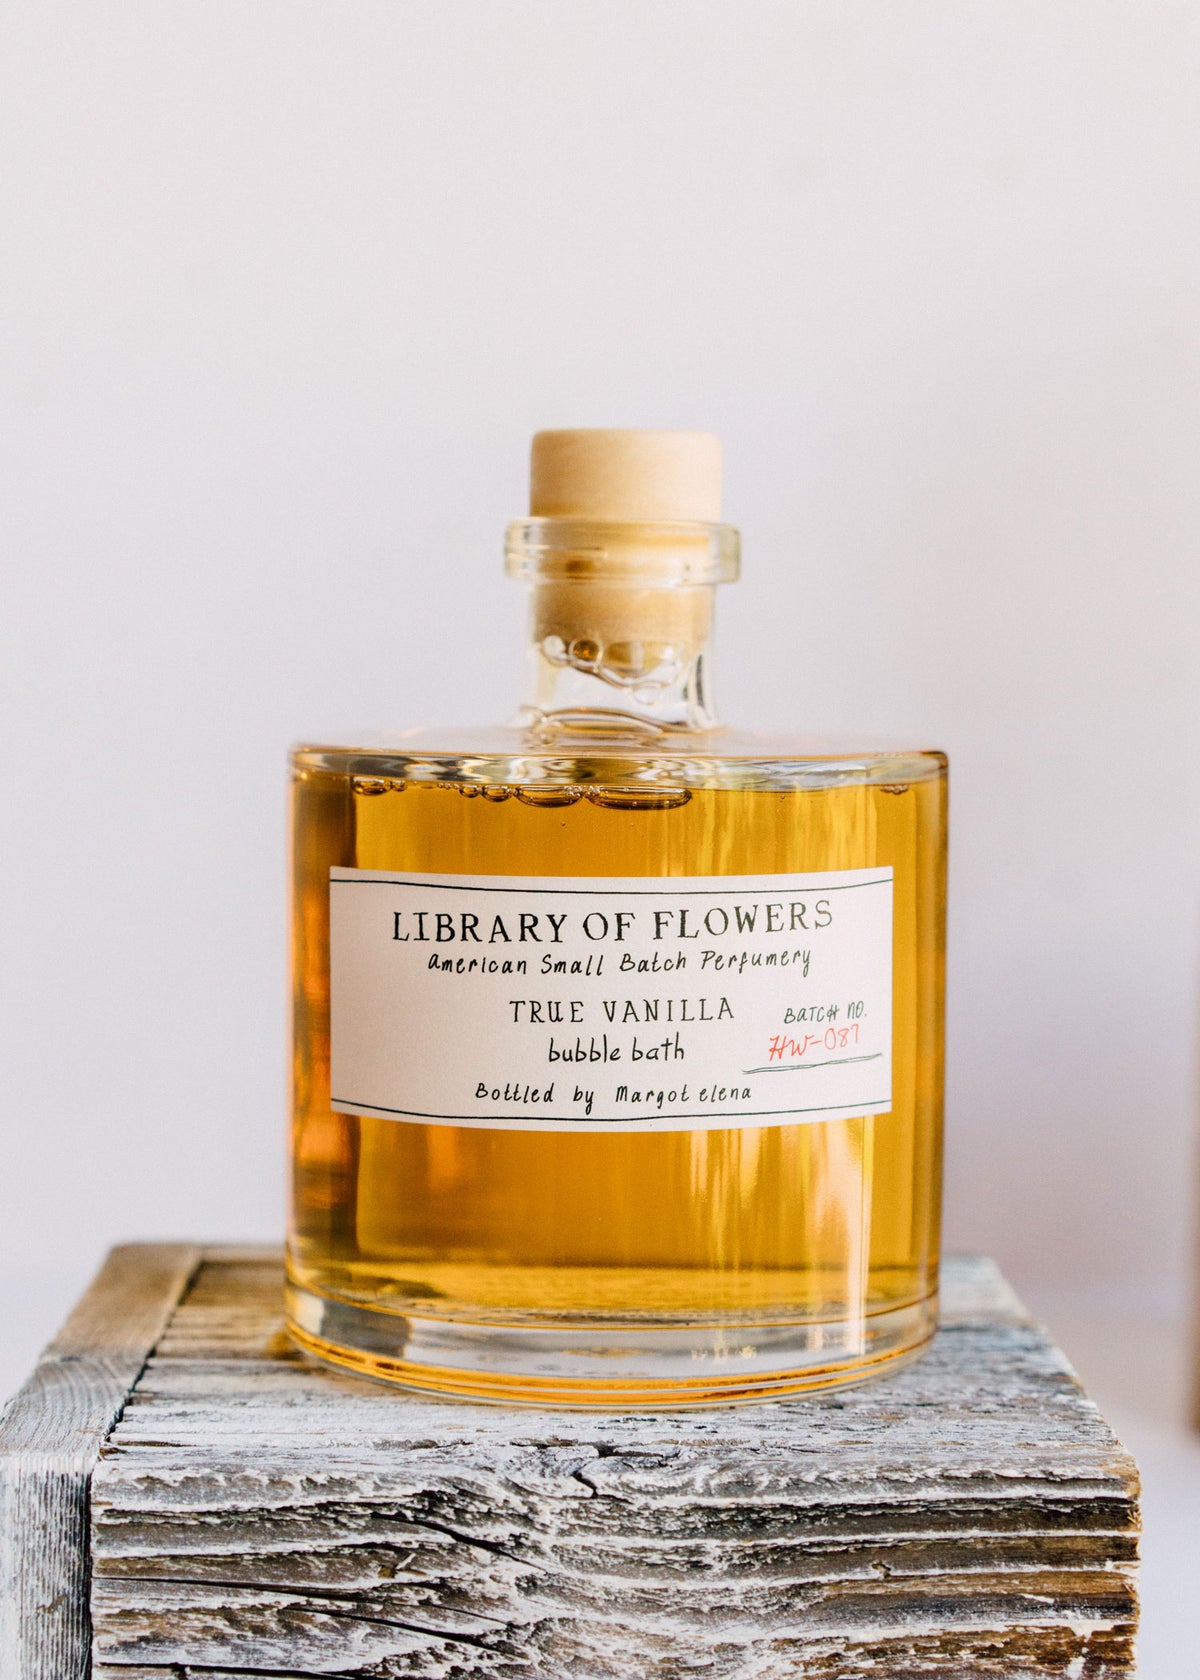 A clear glass bottle of Margot Elena's Library of Flowers True Vanilla Bubble Bath atop a rustic wooden block, positioning the well-lit label front and center against a neutral background.